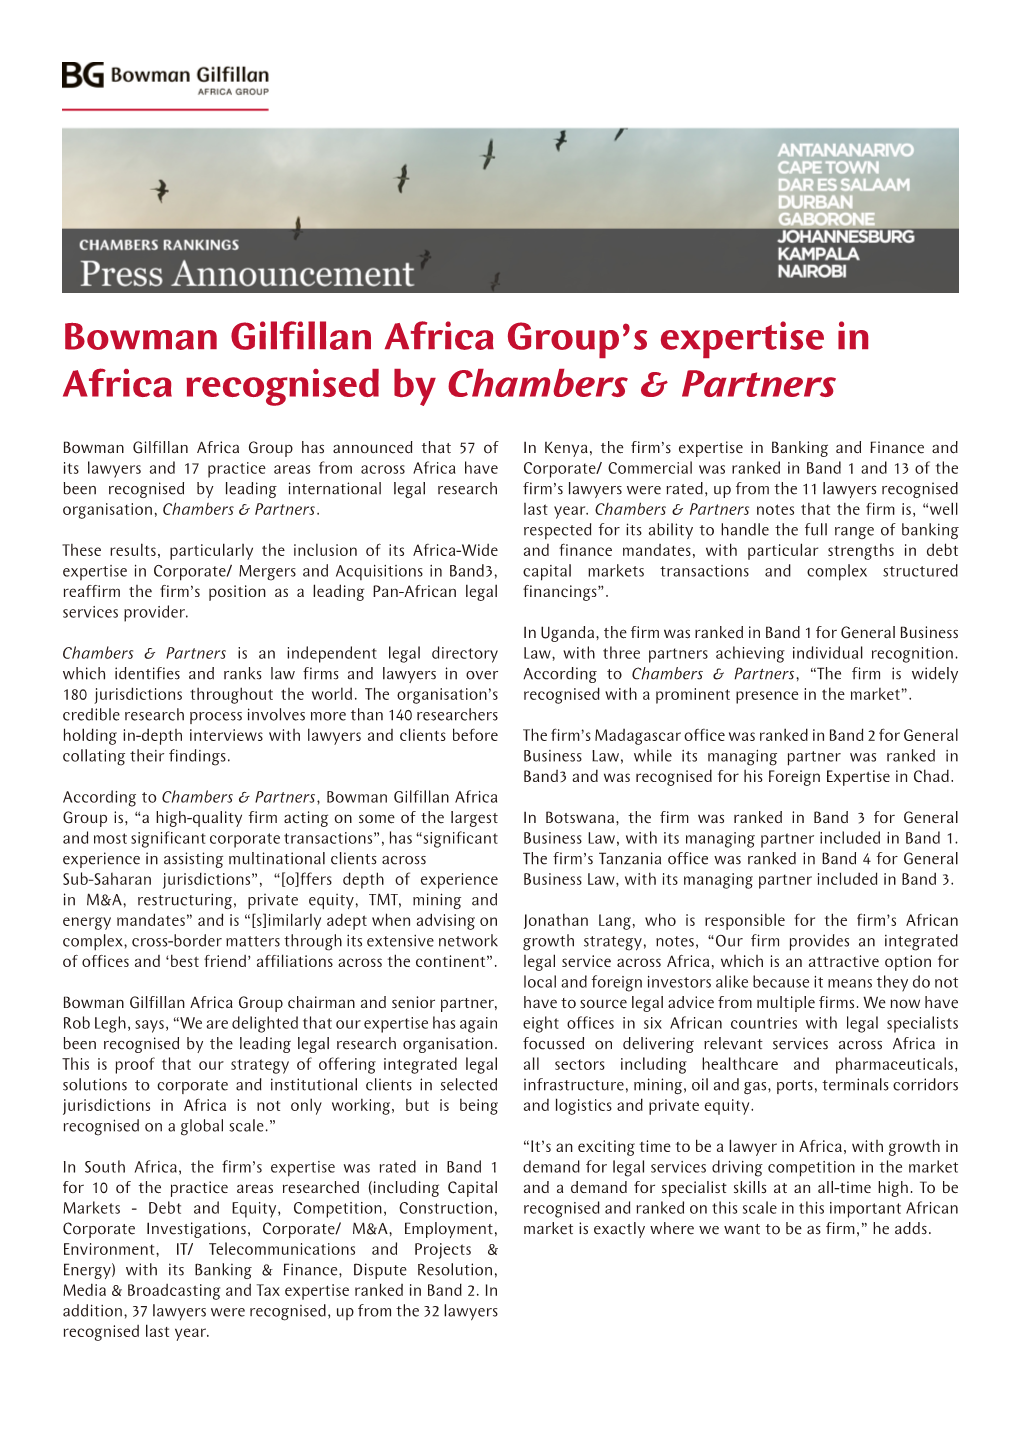 Bowman Gilfillan Africa Group's Expertise in Africa Recognised By